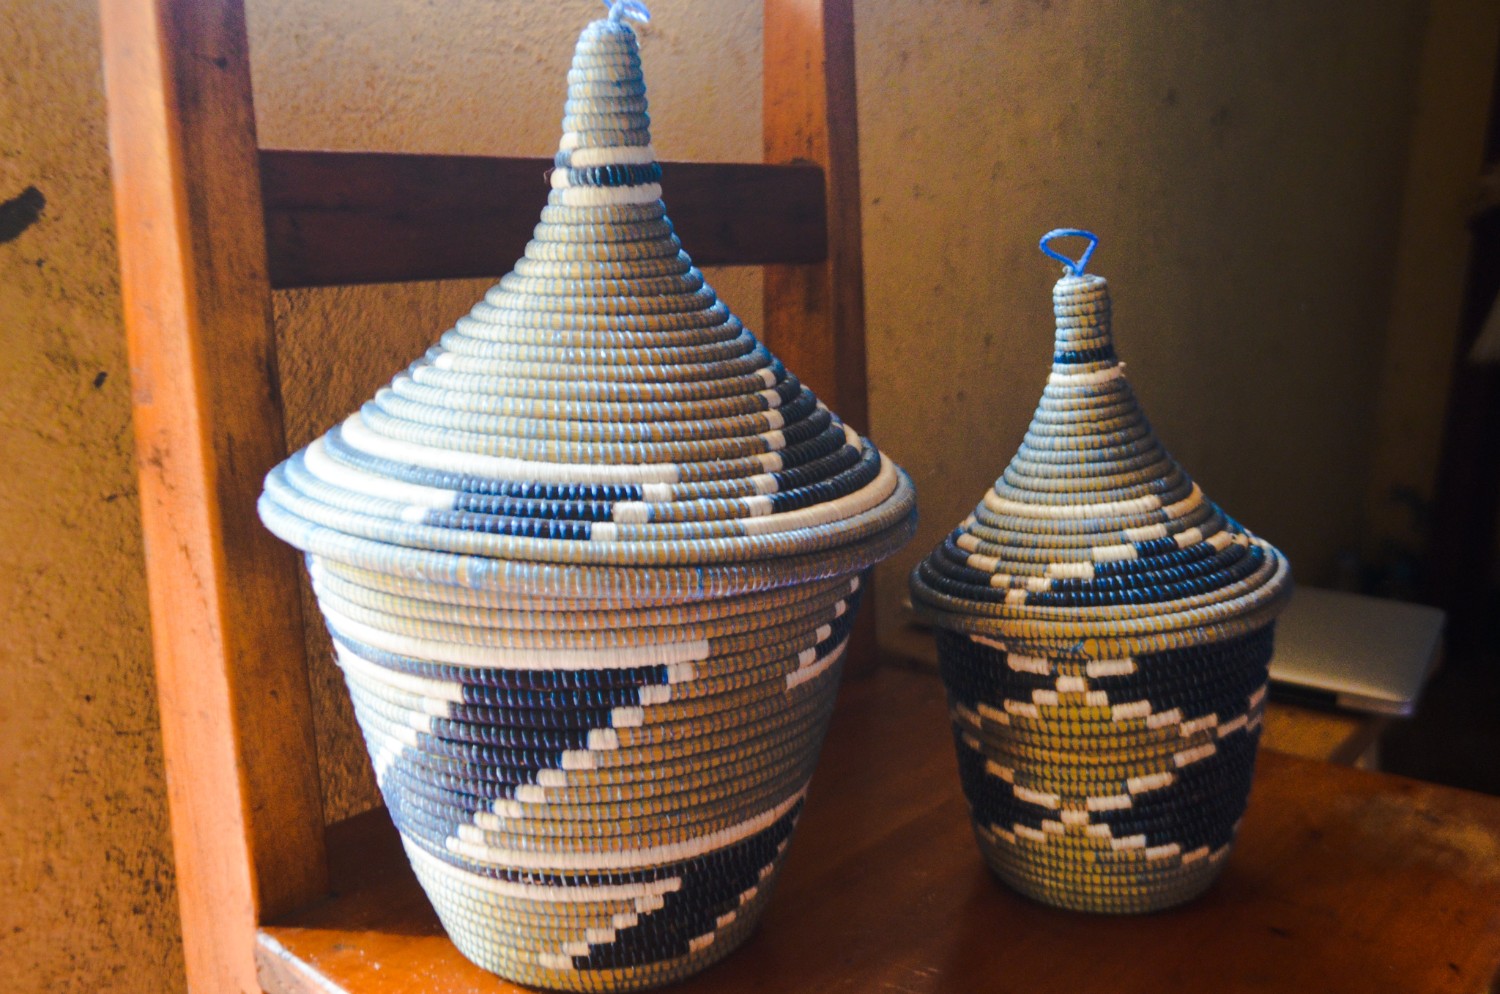 Traditional Rwanda peace basket - woven in various colors with a pyramid top